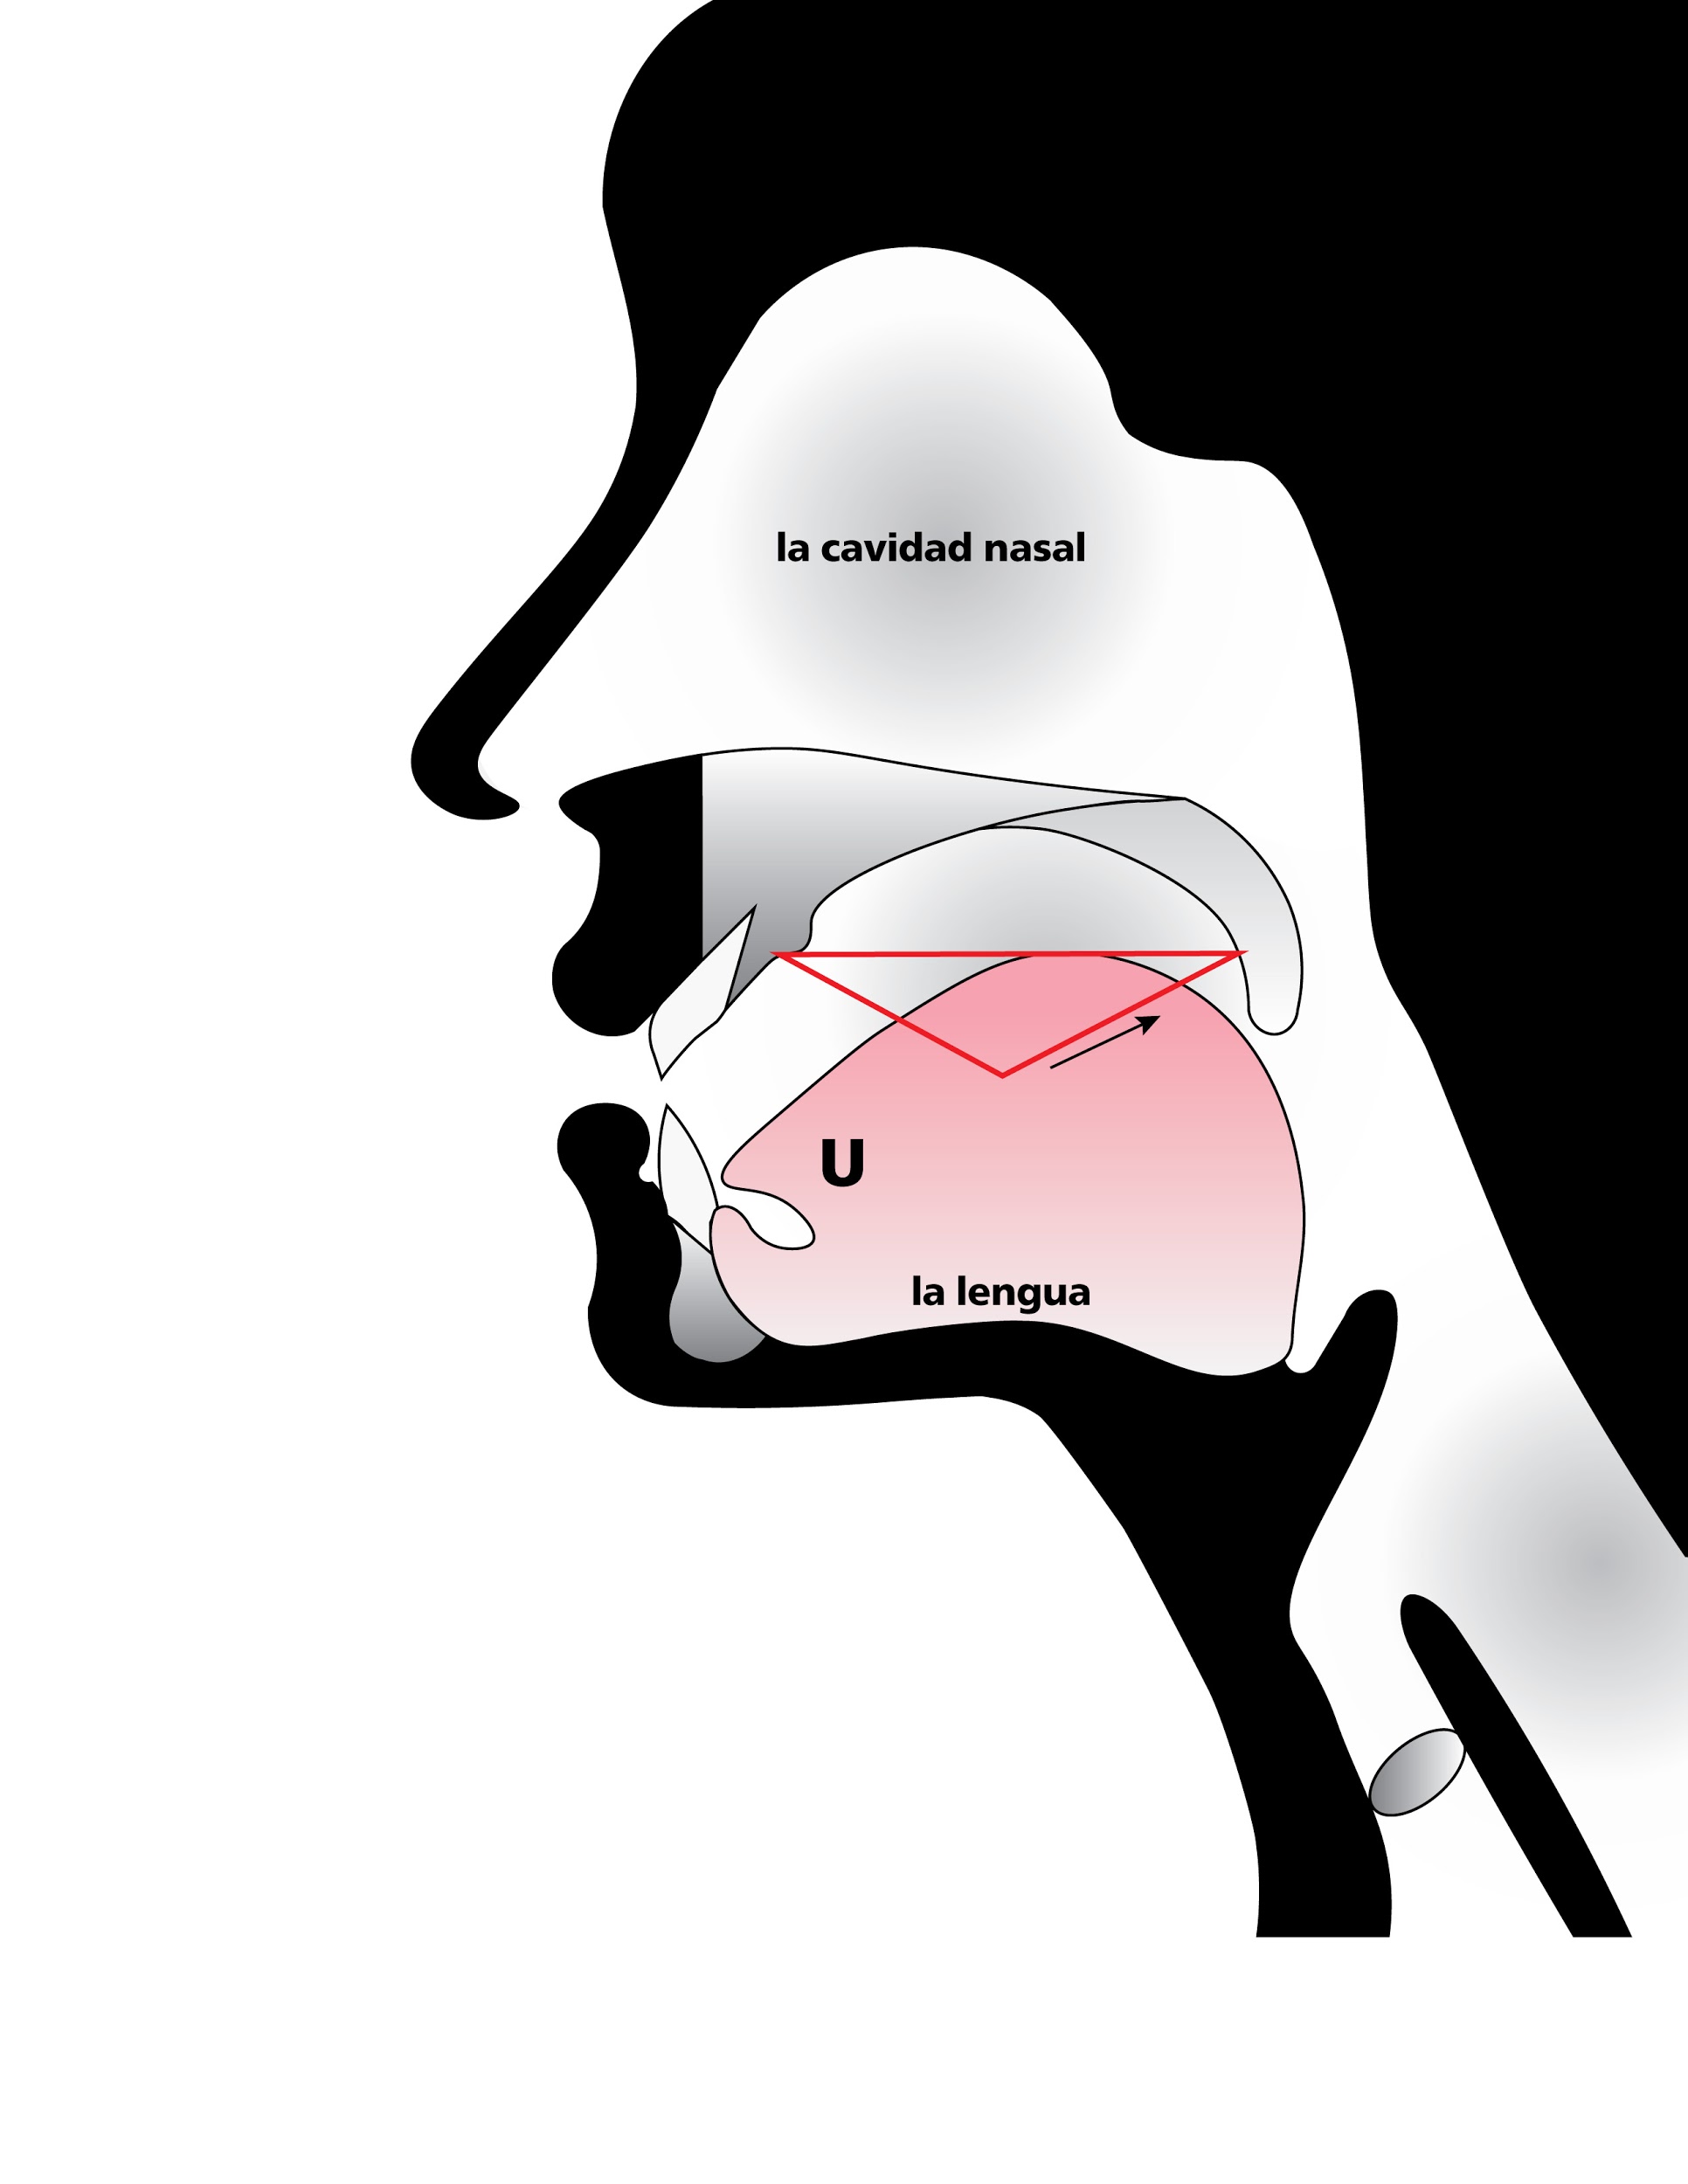 Anatomical sketch of head while speaking, emphasizing space of roof of mouth when tongue pulled back in mouth, in Spanish